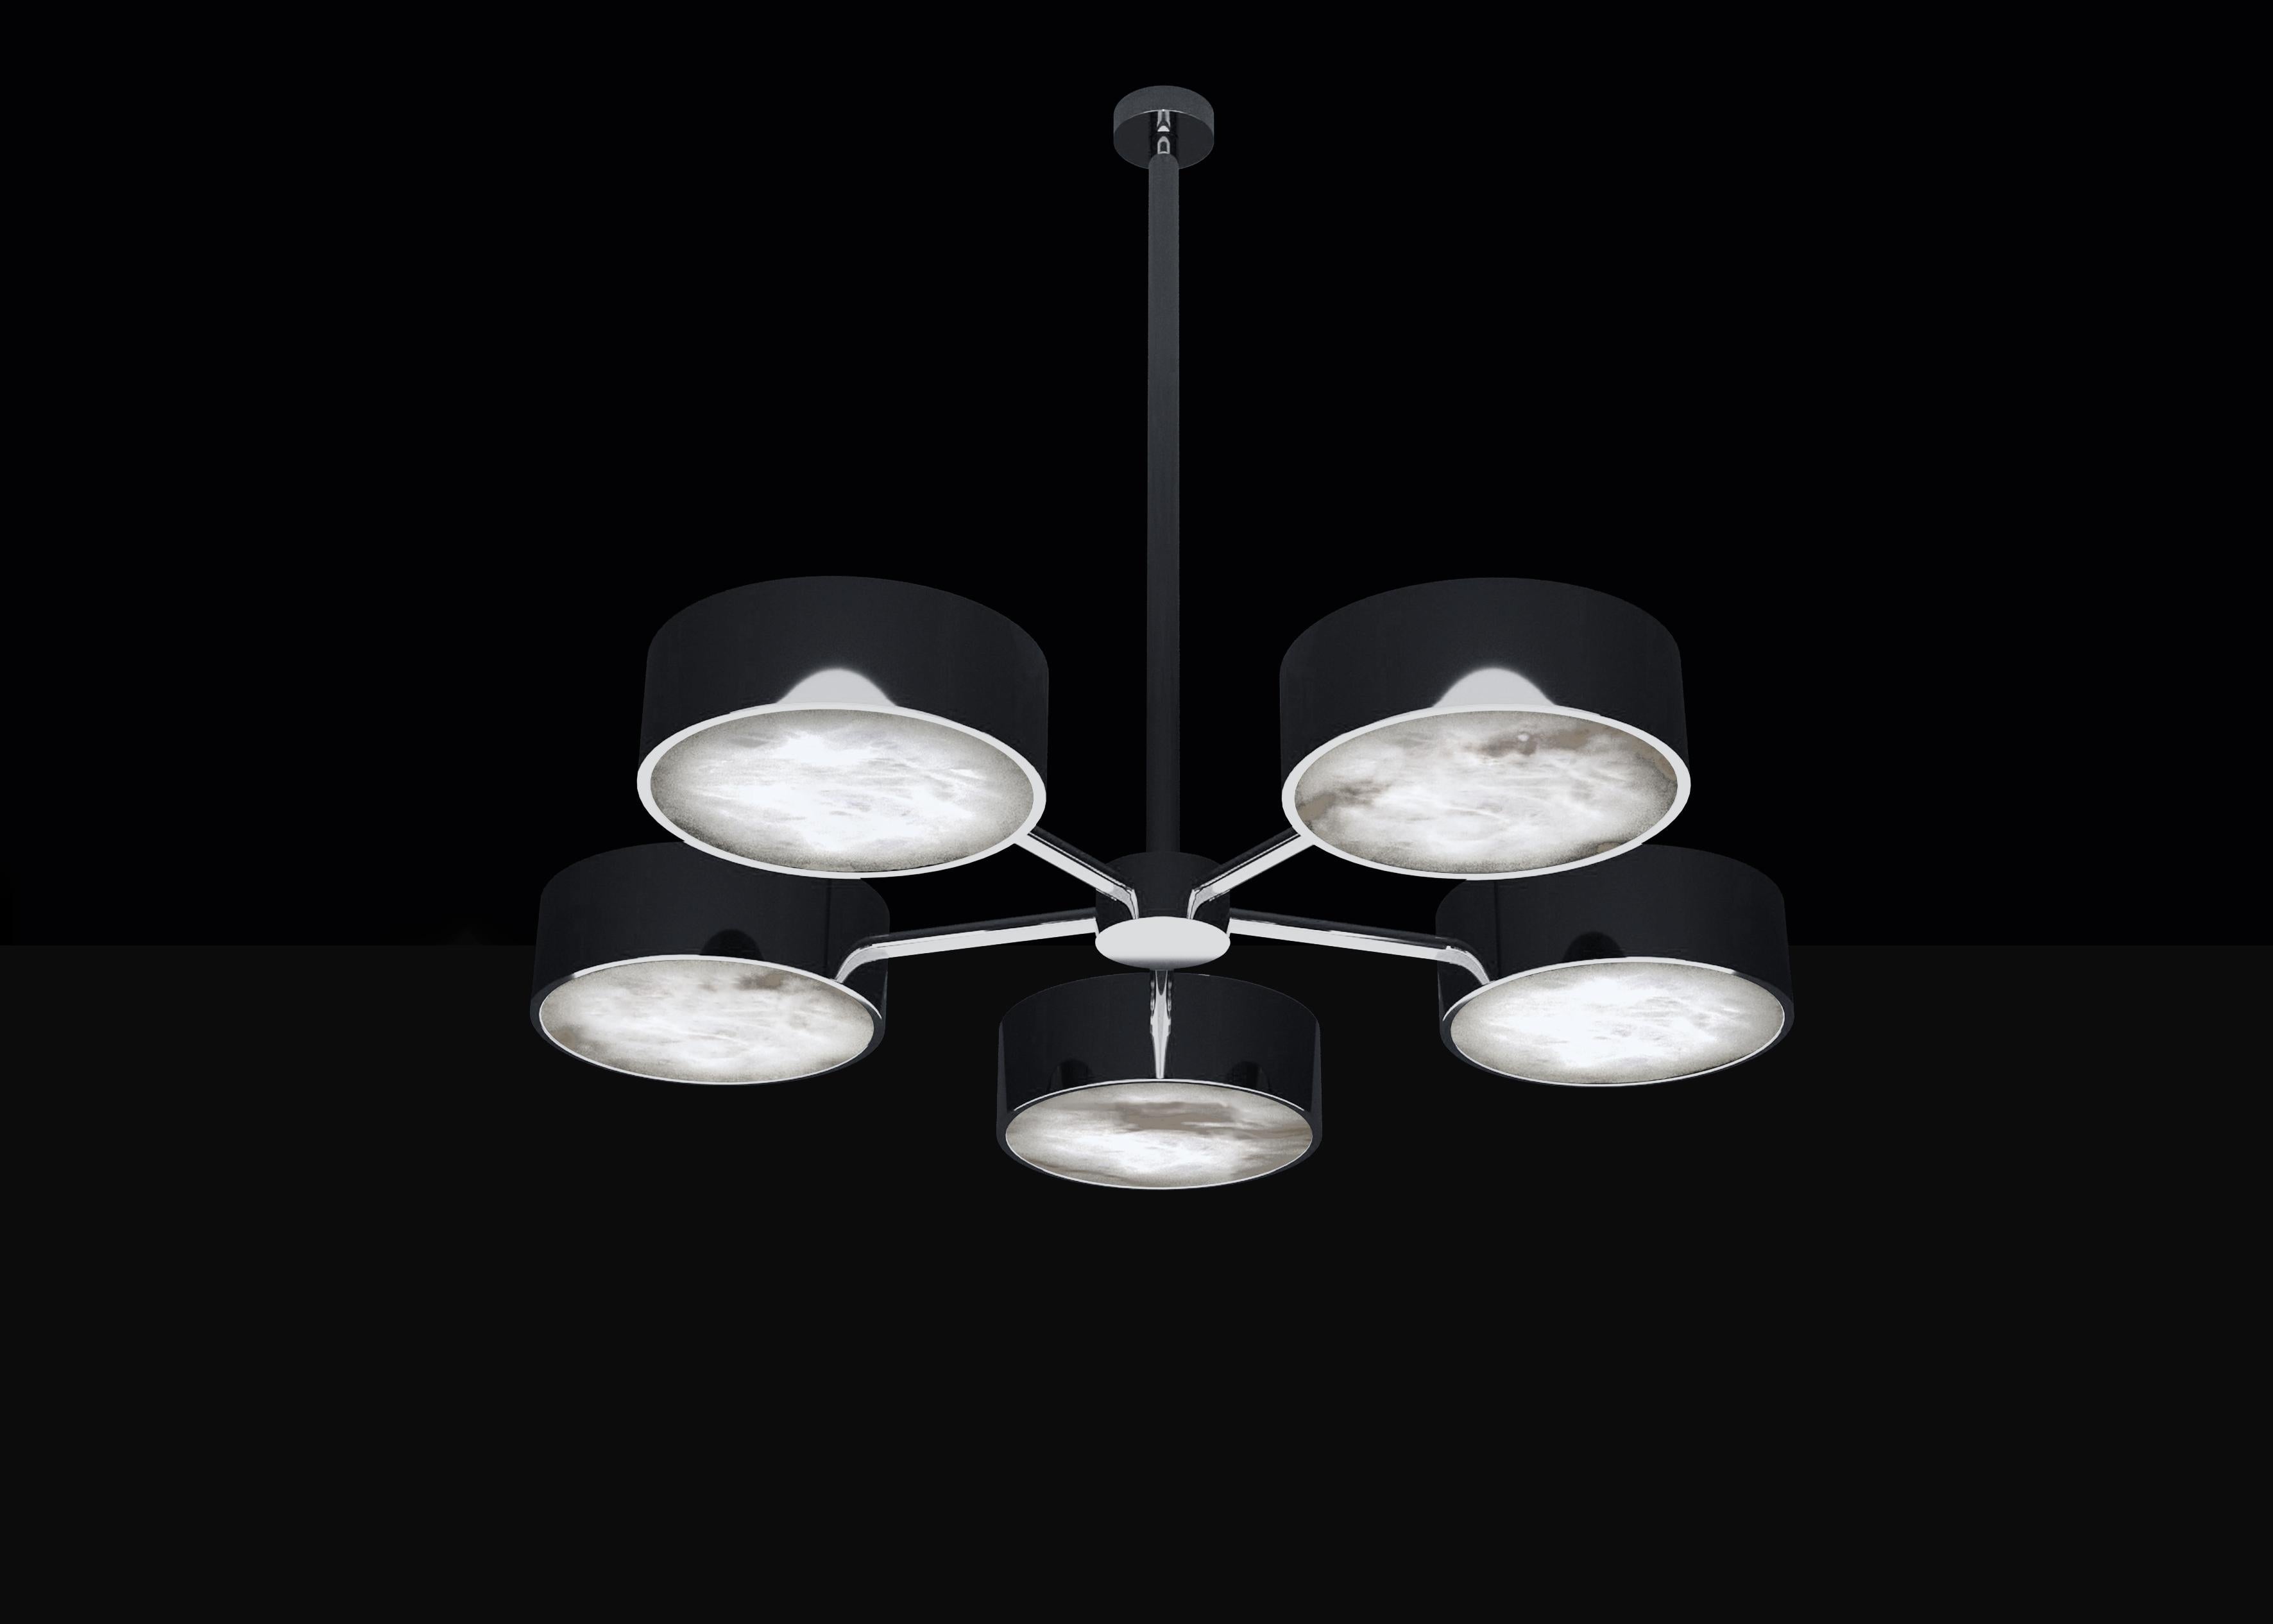 Chaos Shiny Black Metal Chandelier by Alabastro Italiano
Dimensions: D 97 x W 100 x H 84.5 cm.
Materials: White alabaster and metal.

Available in different finishes: Shiny Silver, Bronze, Brushed Brass, Ruggine of Florence, Brushed Burnished, Shiny